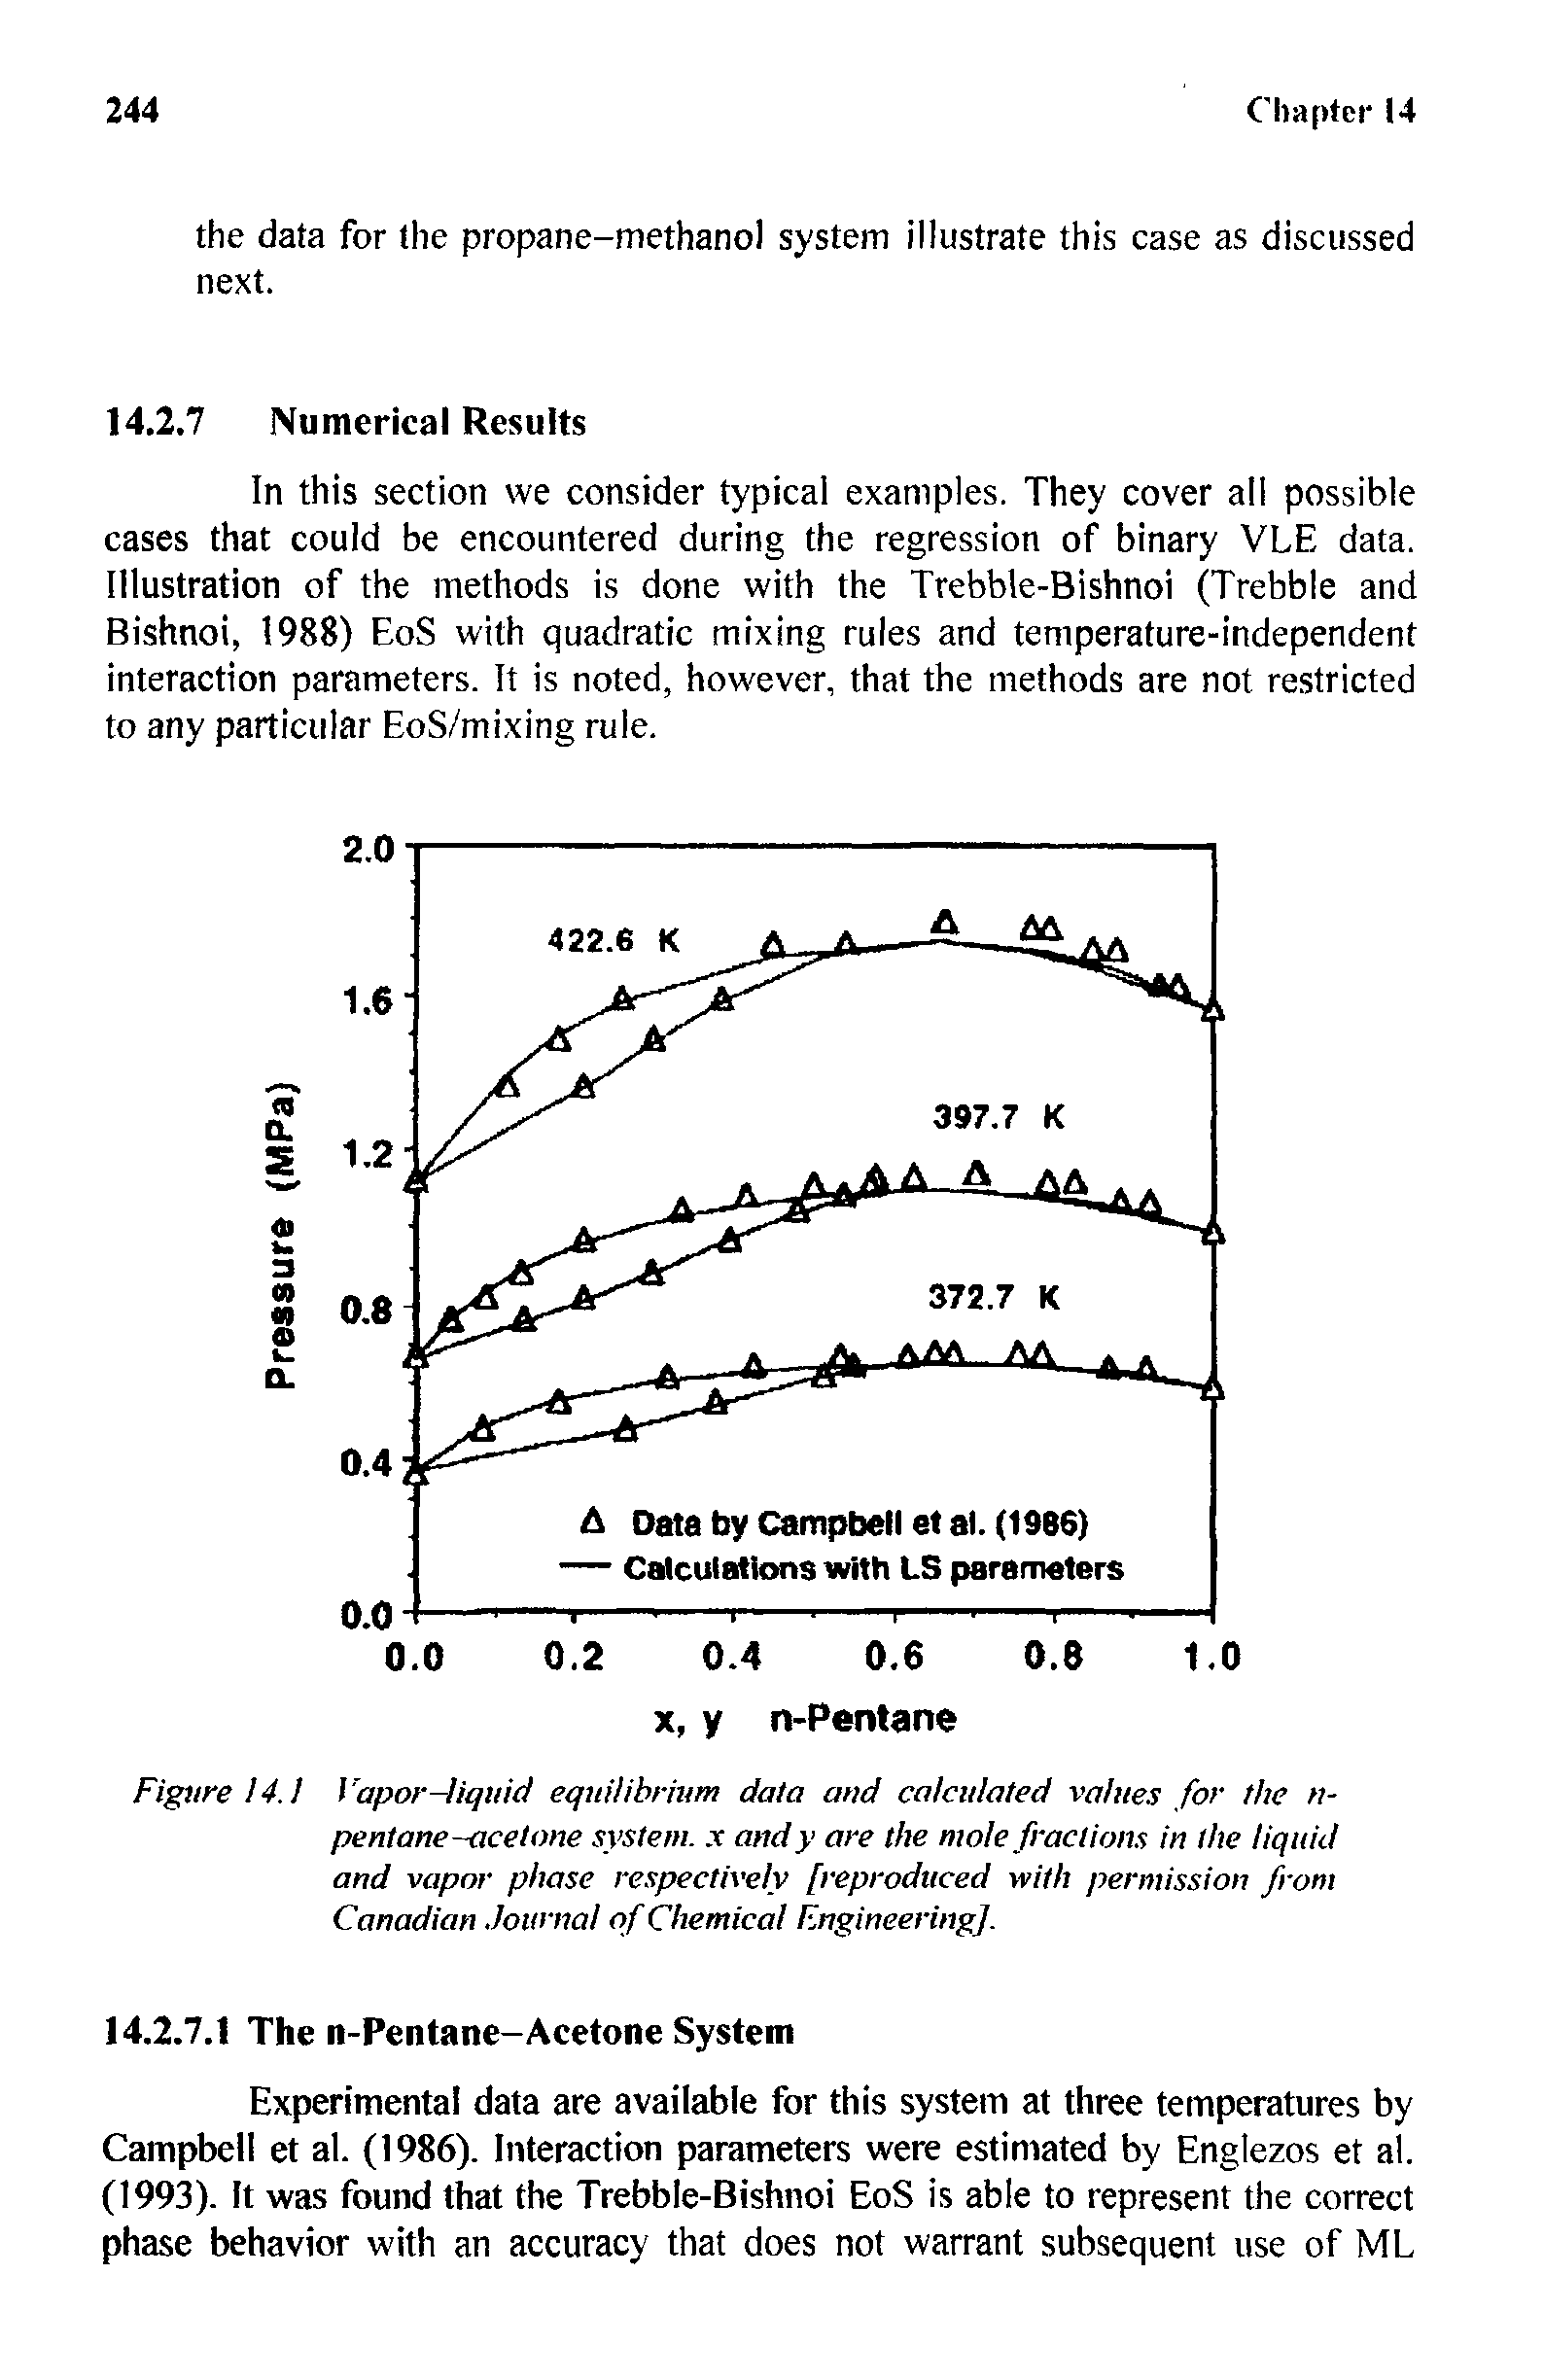 Figure 14.1 Vapor-liquid equilibrium data and calcidated values for the n-pentane-acetone system, x andy are the mole fractions in the liquid and vapor phase respectively [reproduced with permission from Canadian Journal of Chemical Engineering].